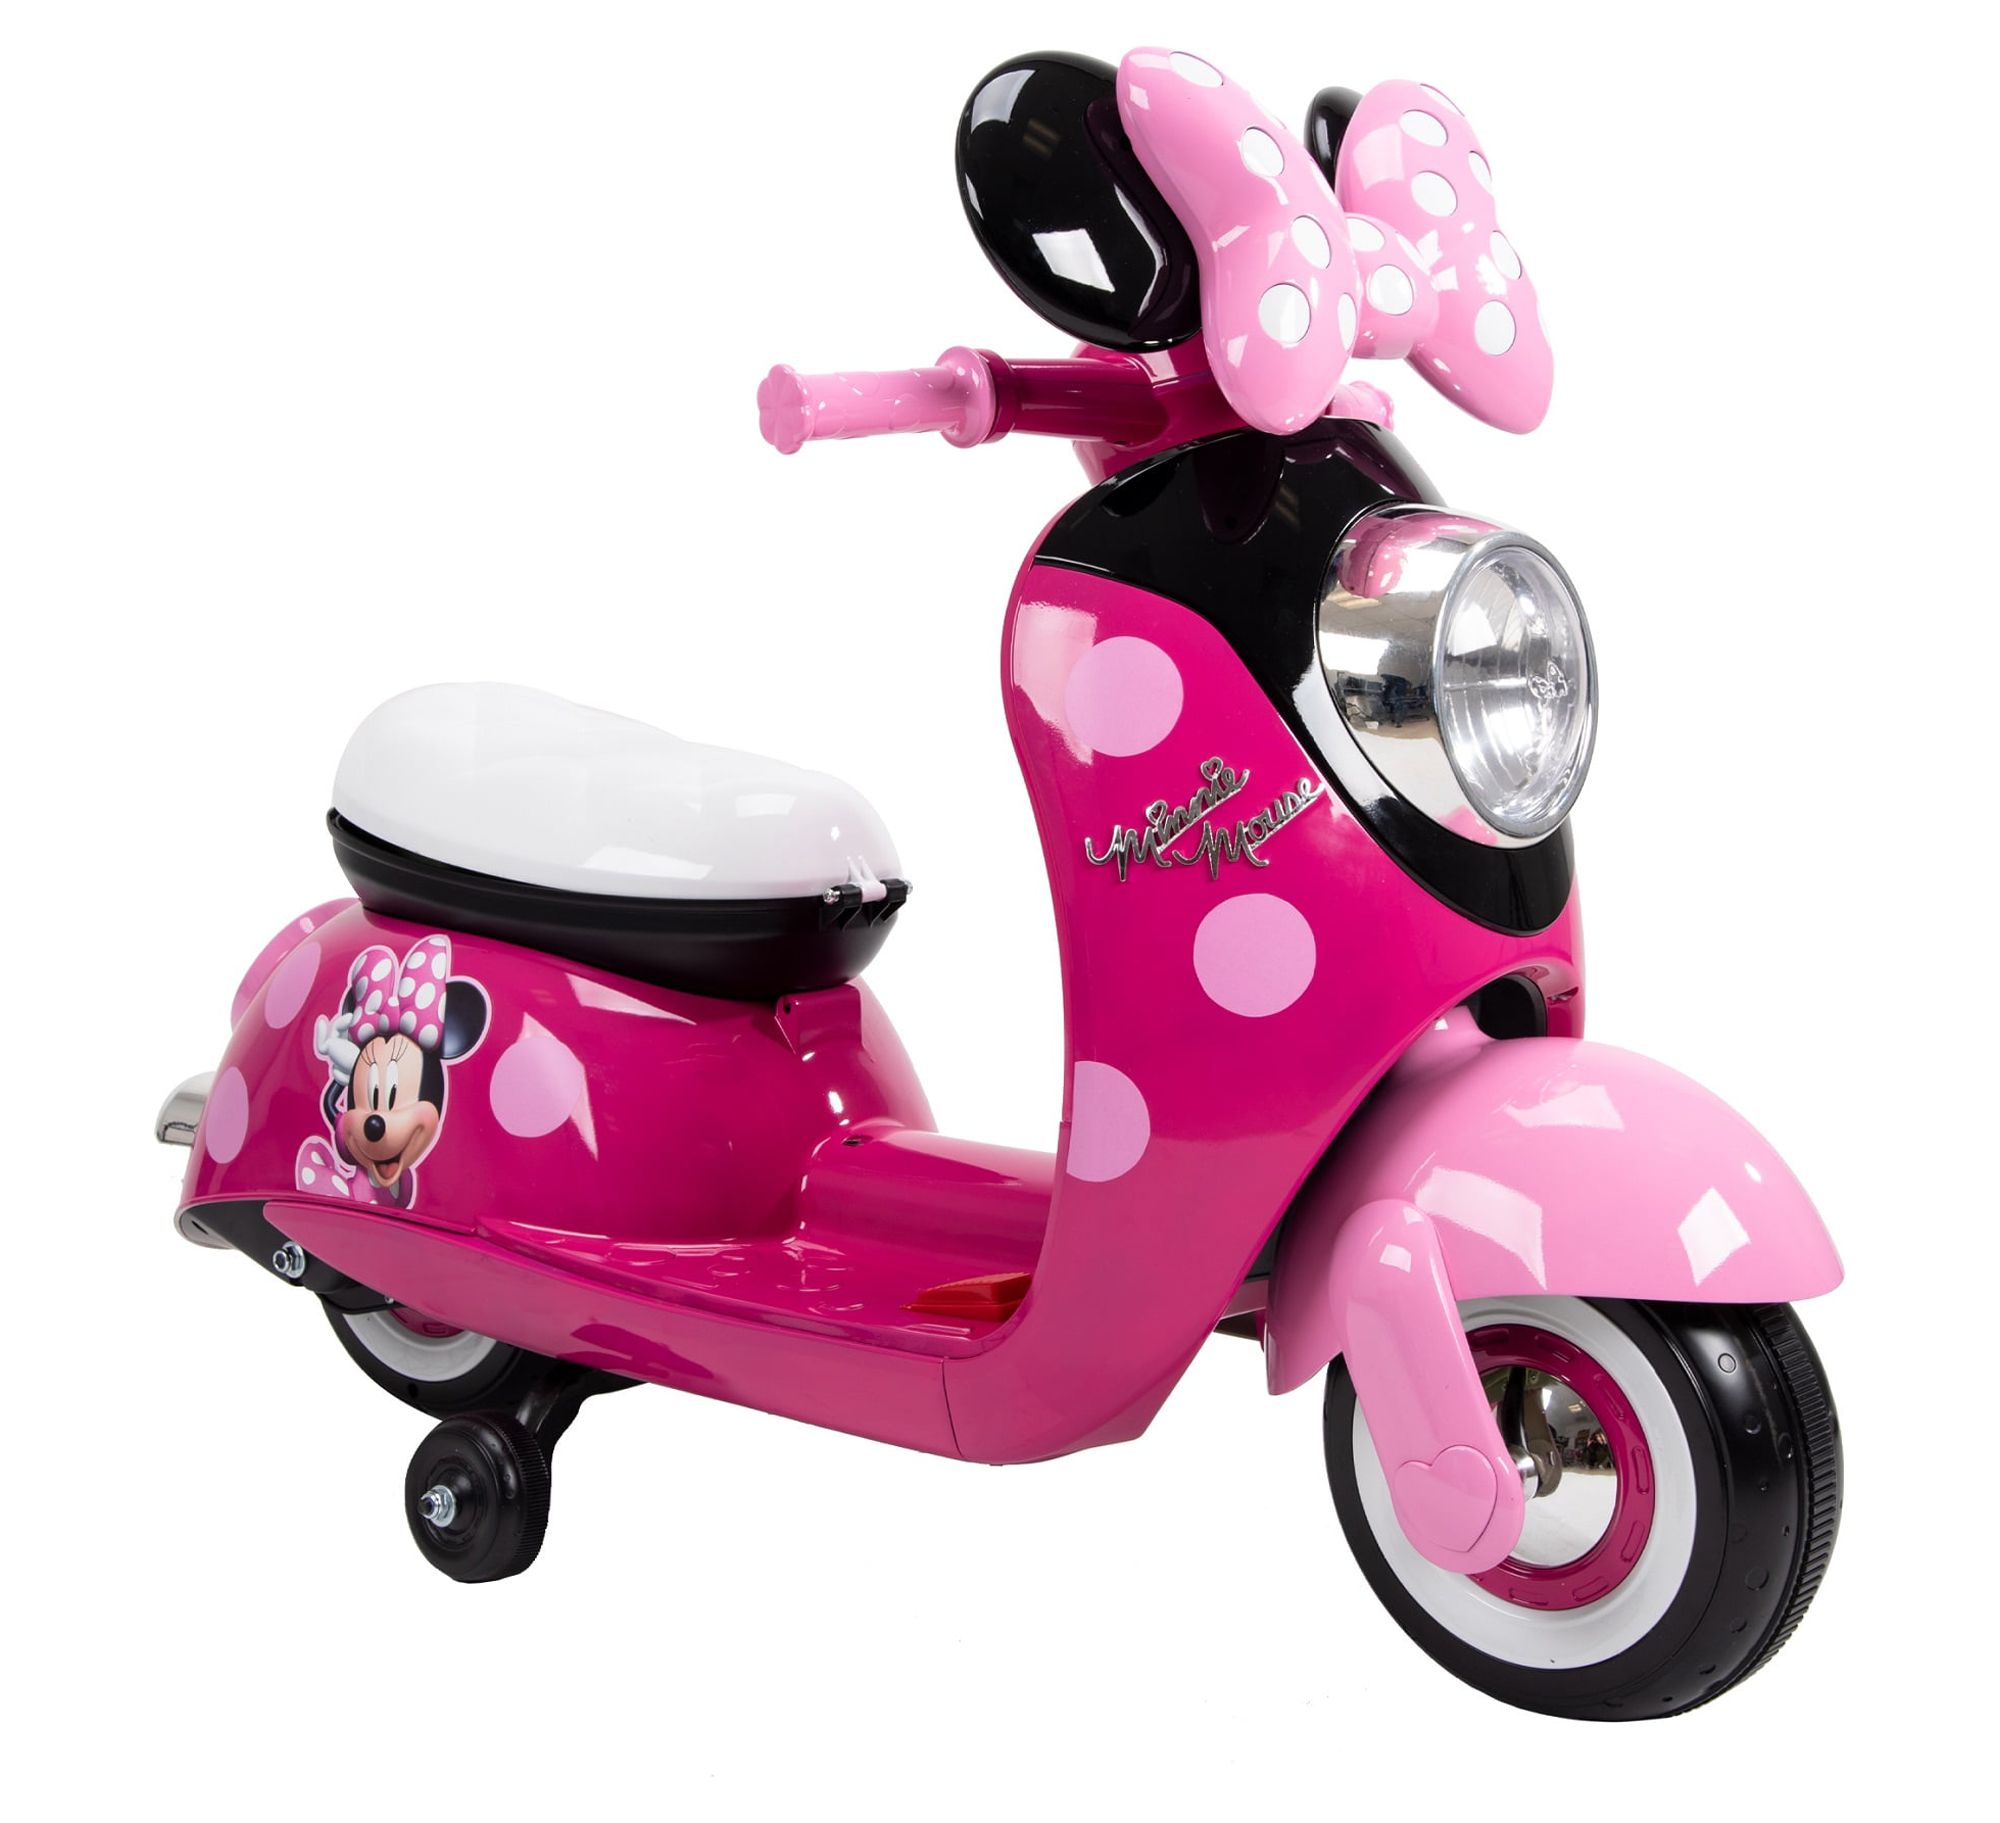 Disney Minnie Mouse 6V Euro Scooter Ride-on Battery-Powered Toy for Girls, Ages 1.5+ Years, by Huffy - image 5 of 14